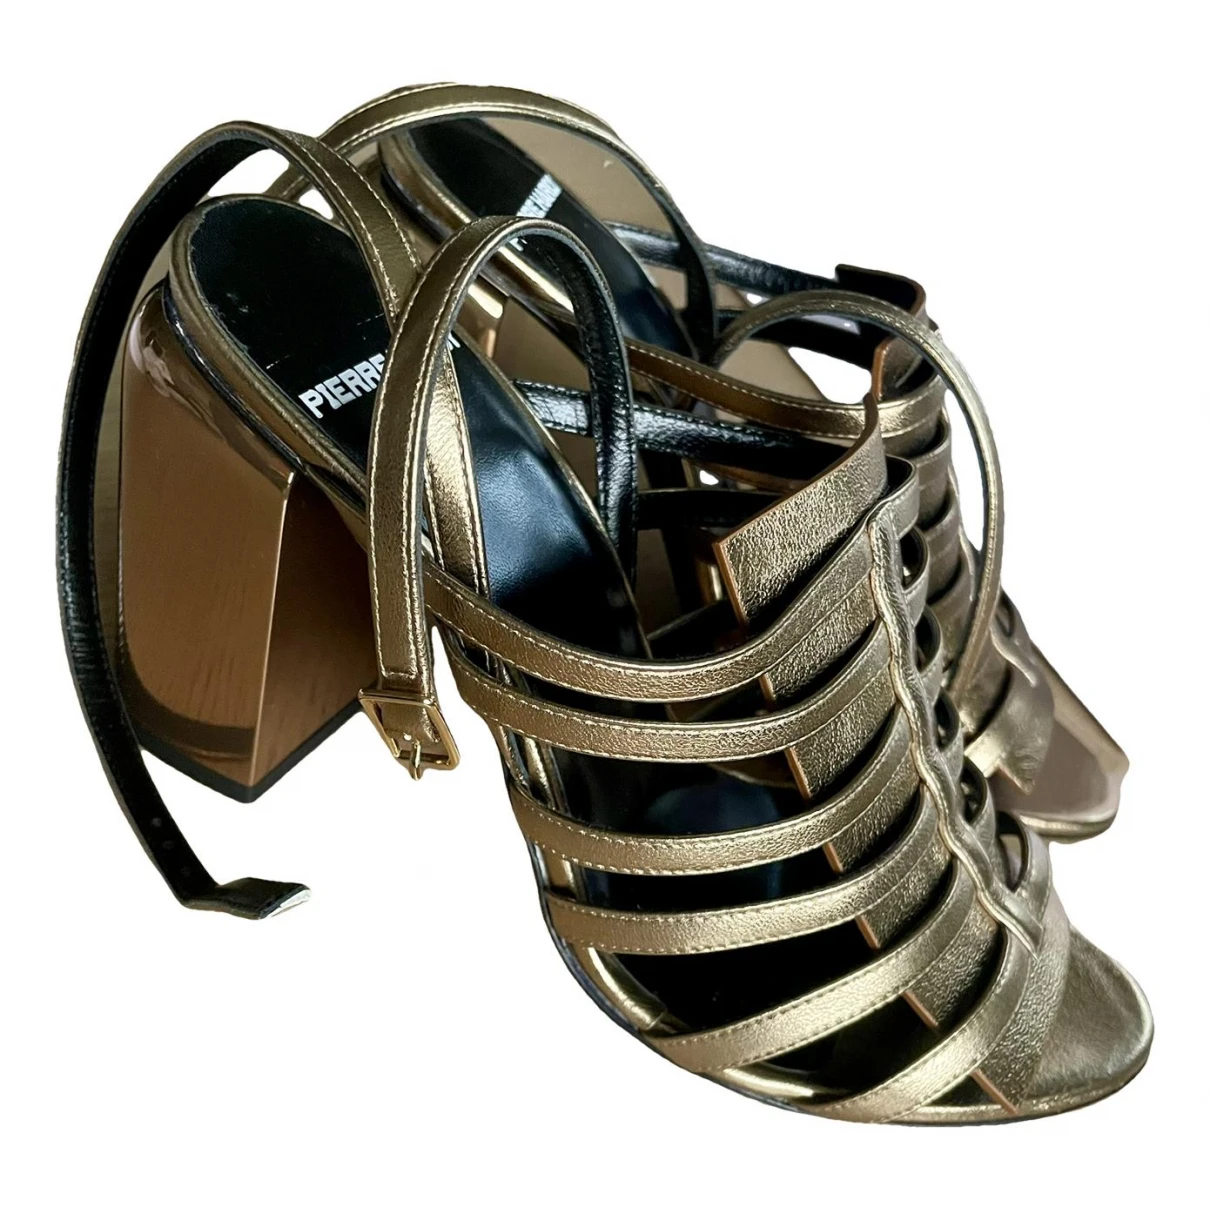 shoes Pierre Hardy sandals for Female Leather 36 EU. Used condition